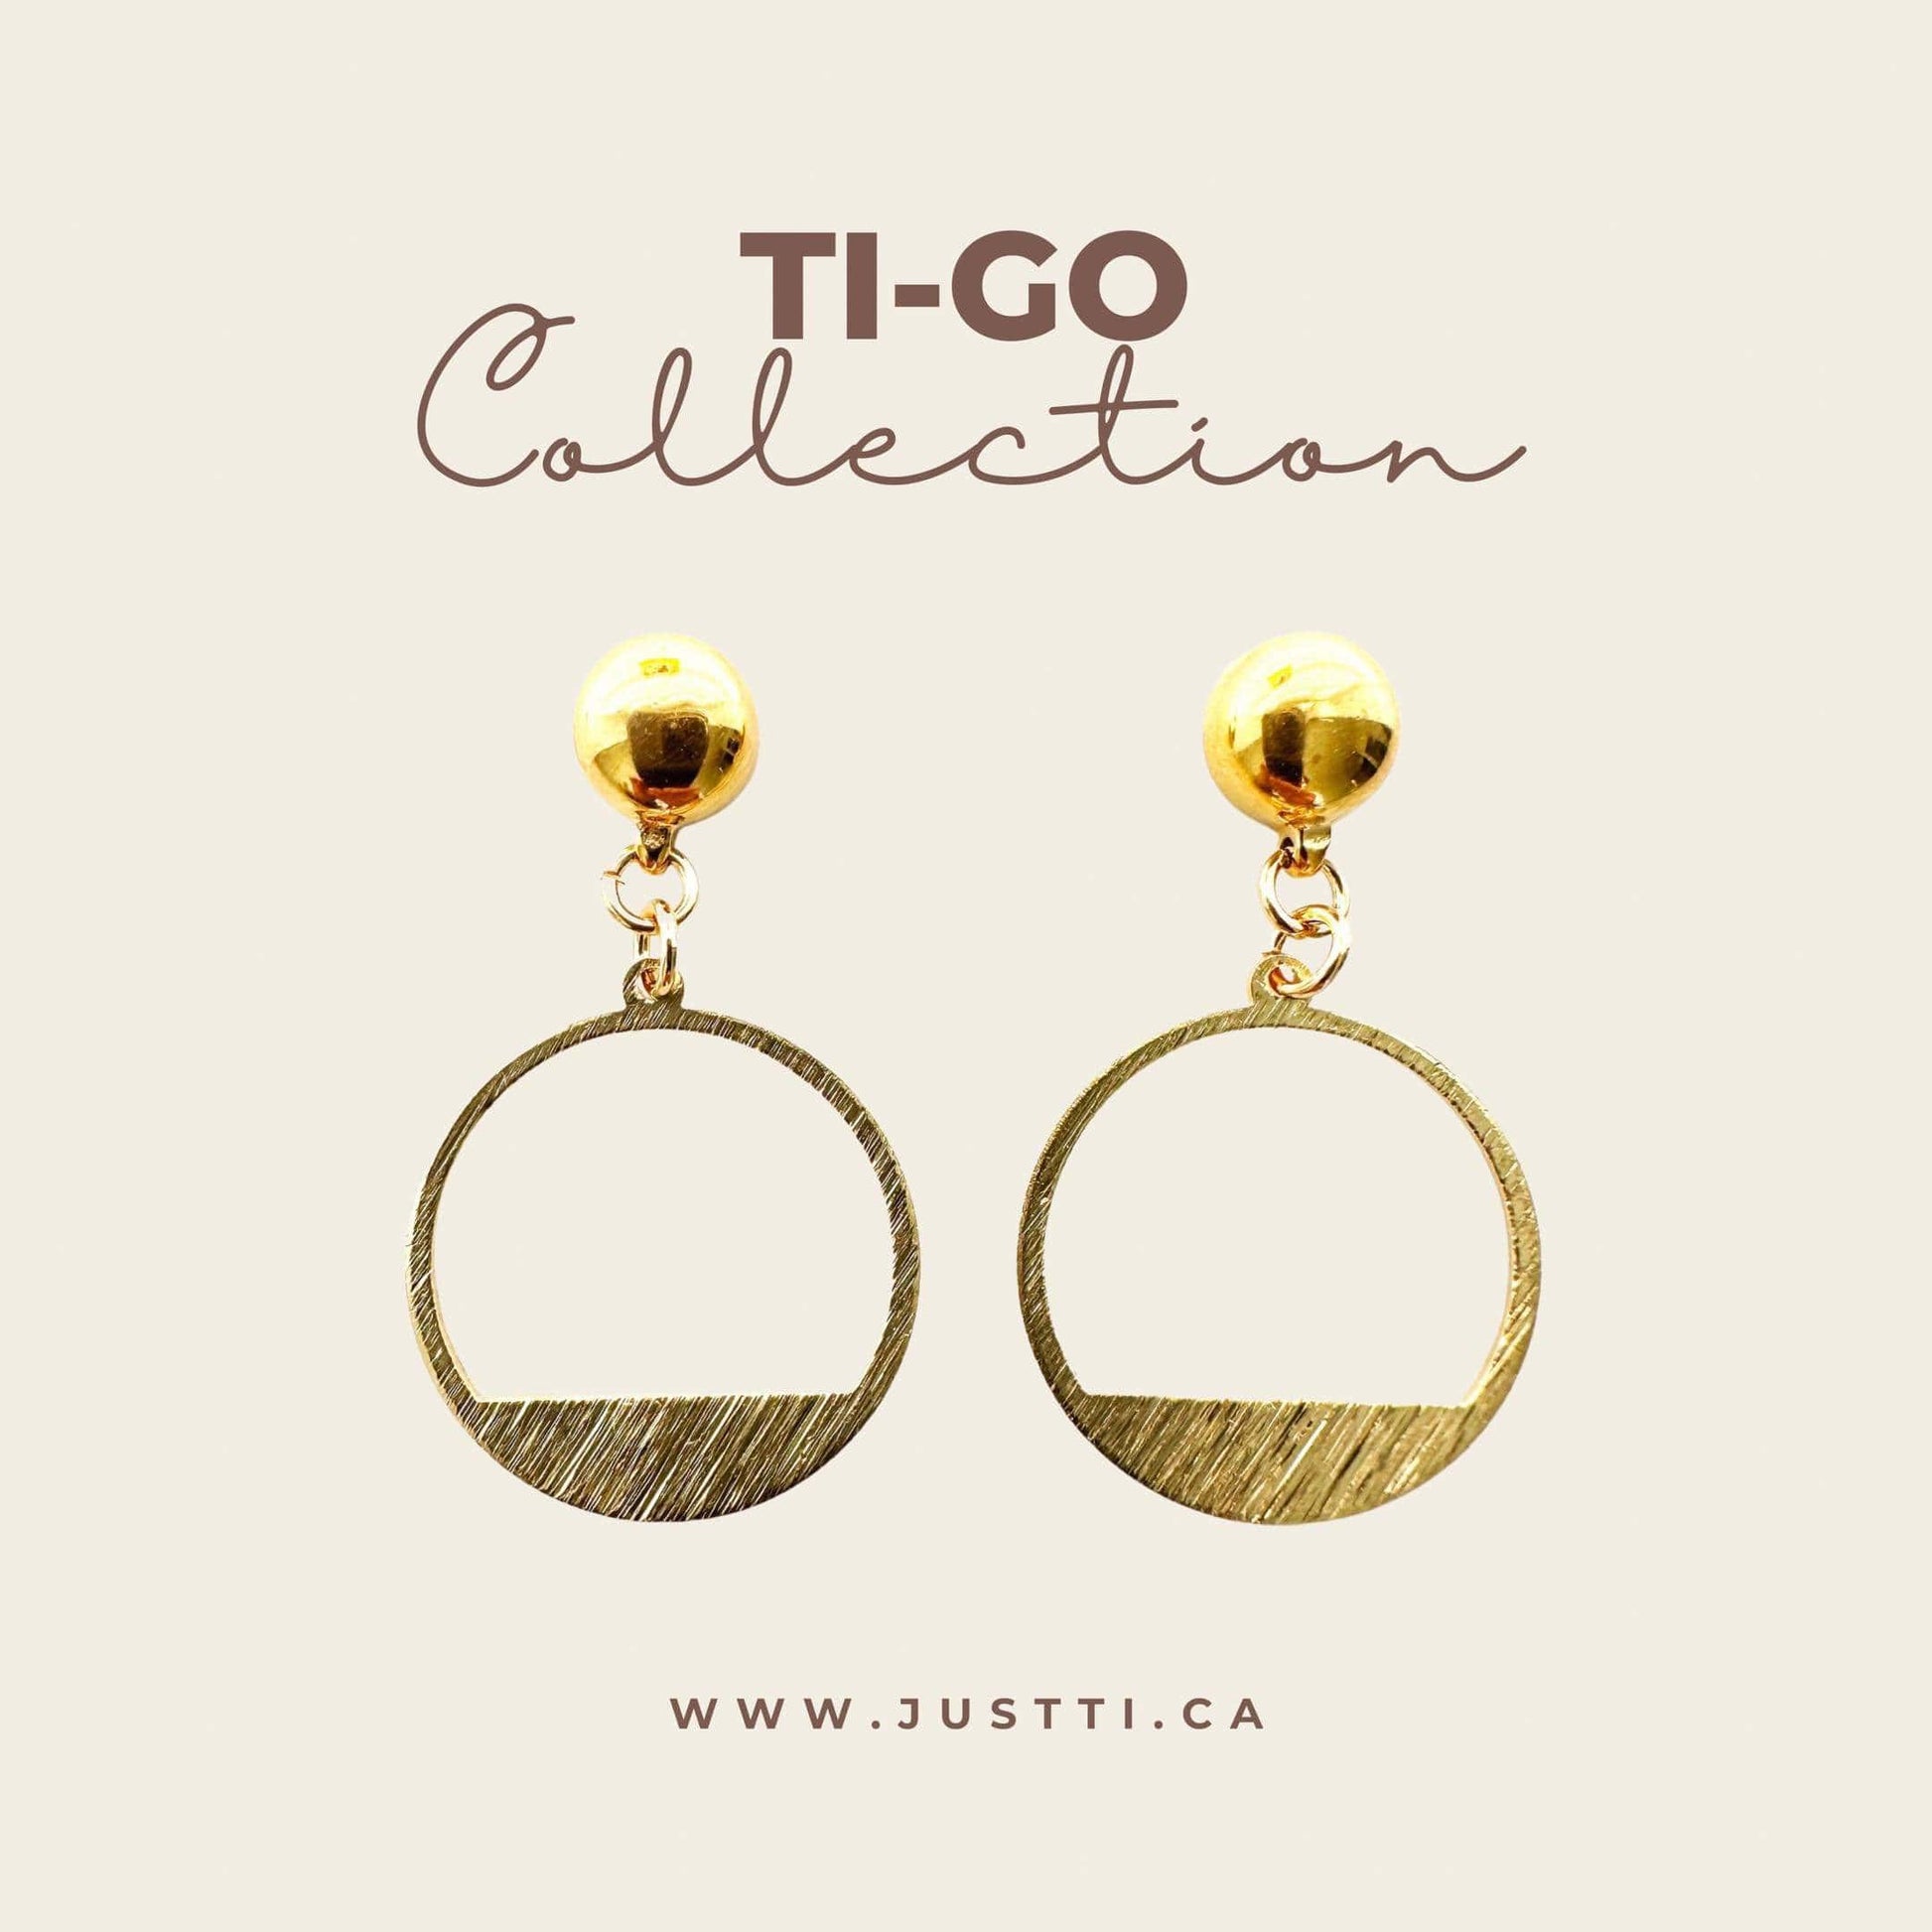 Ti-Go Golden rings earring. Detachable earrings for a truly hypoallergenic jewellery on a white background collection